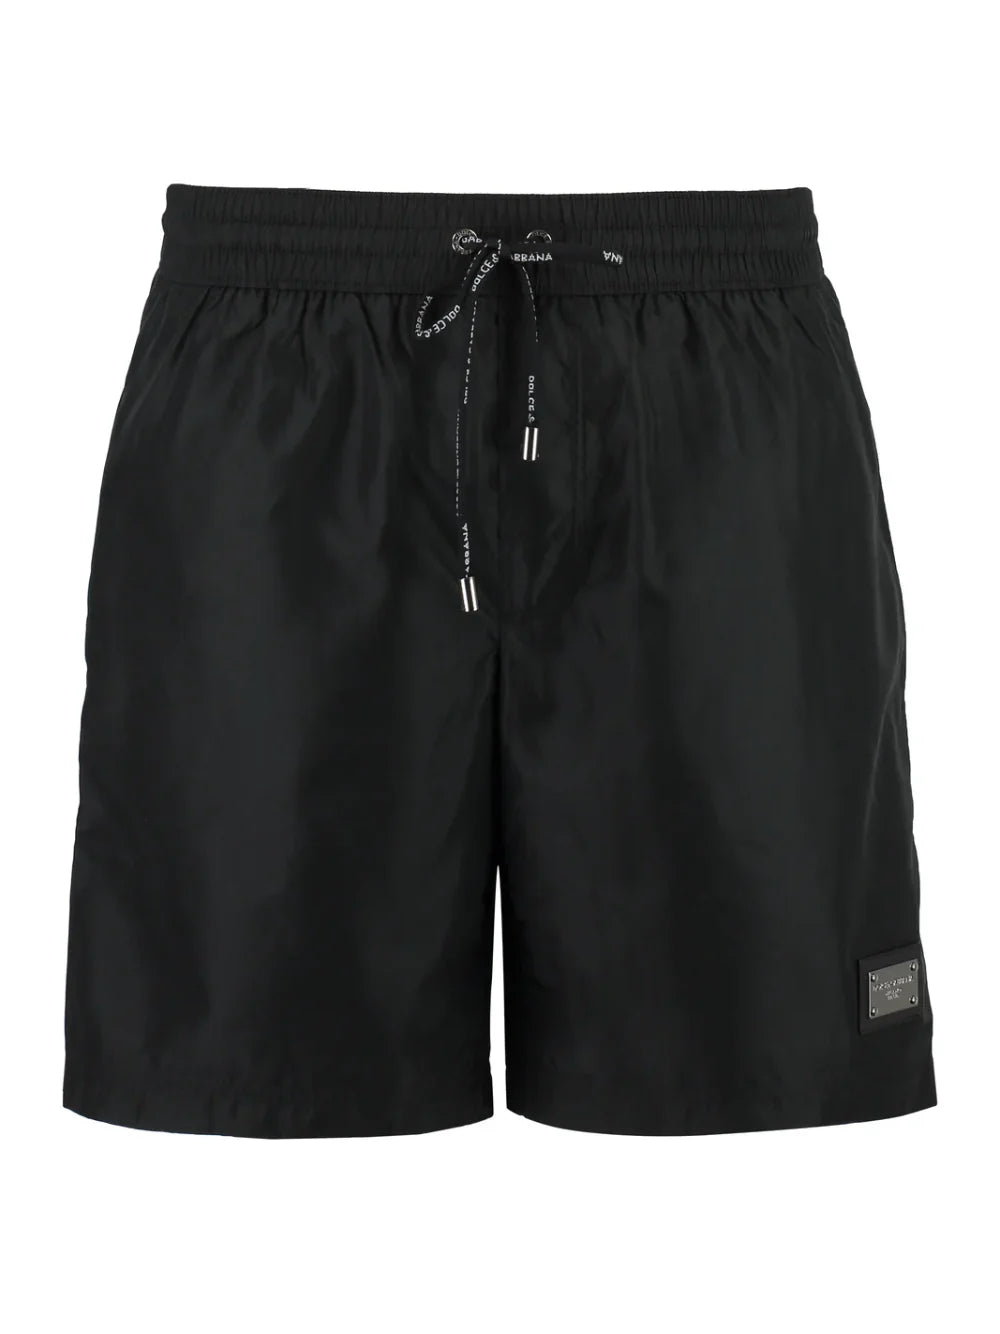 Dolce & Gabbana Silver Plaque Plate Drawstring Swimshorts in Black